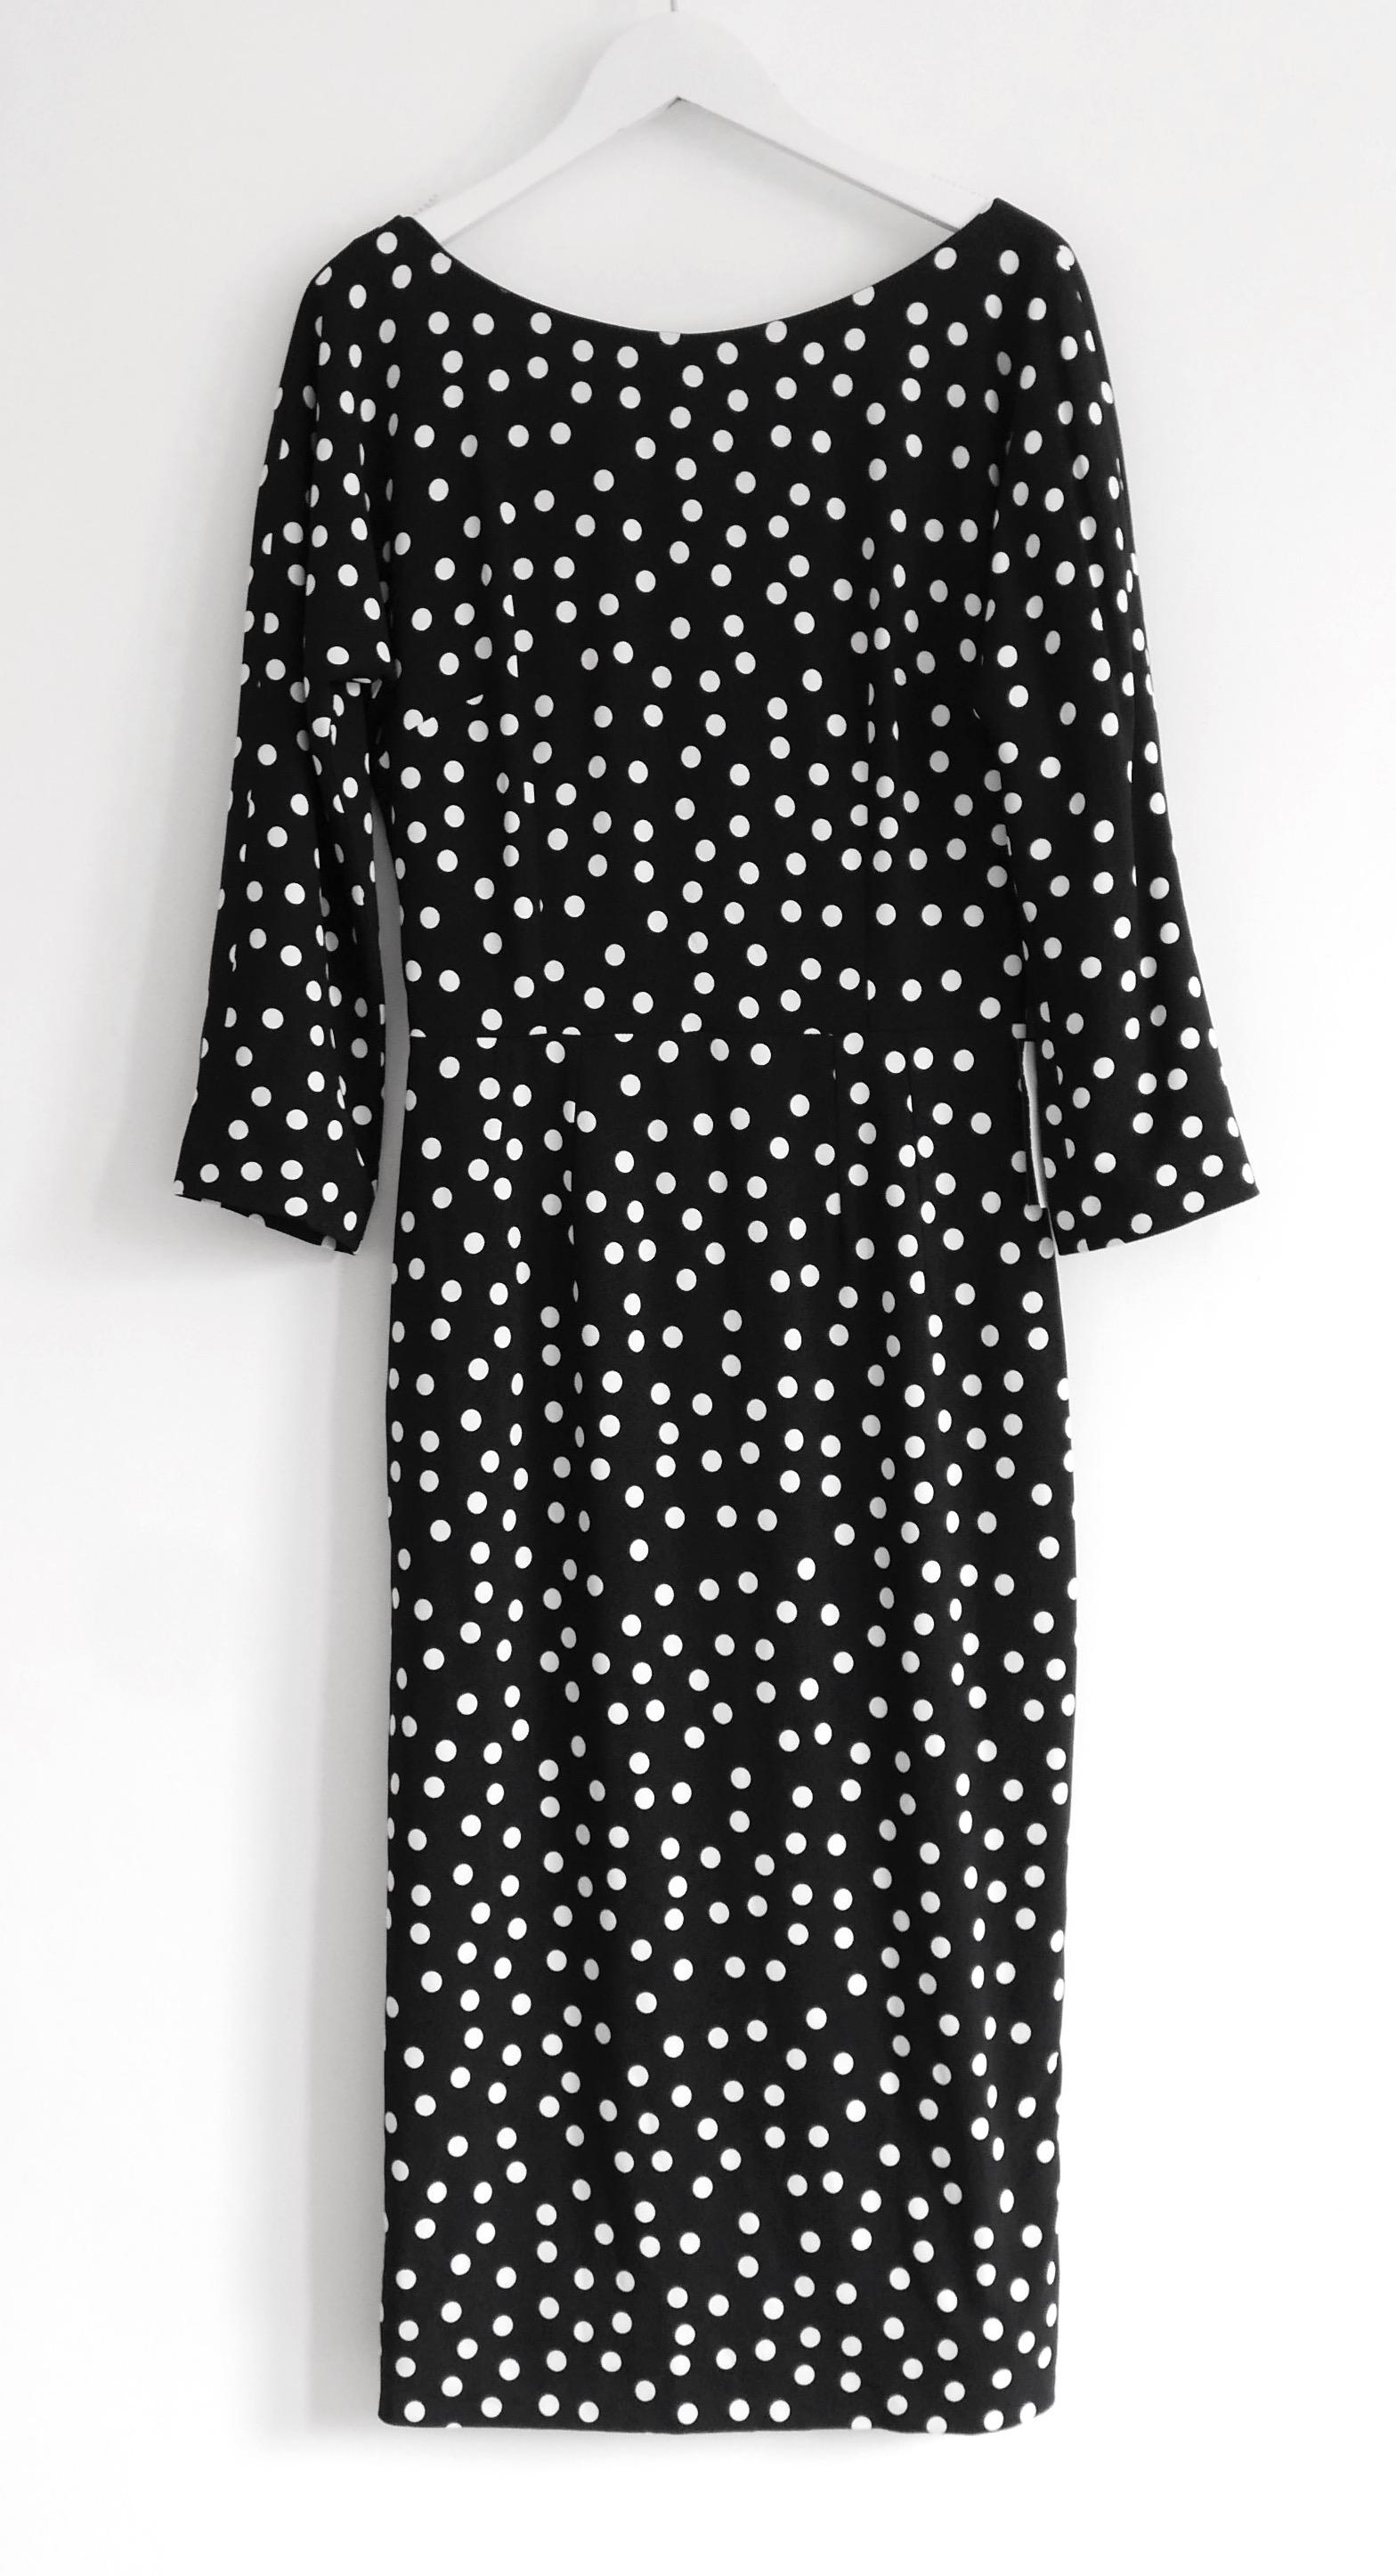 Gorgeous, ultra feminine Dolce & Gabbana polka dot print sheath dress. Bought for £2175 and new with tag. Made from soft black and white viscose/elastane crepe with a classic mini polka dot print. It has Dolce’s signature tailored pencil cut with